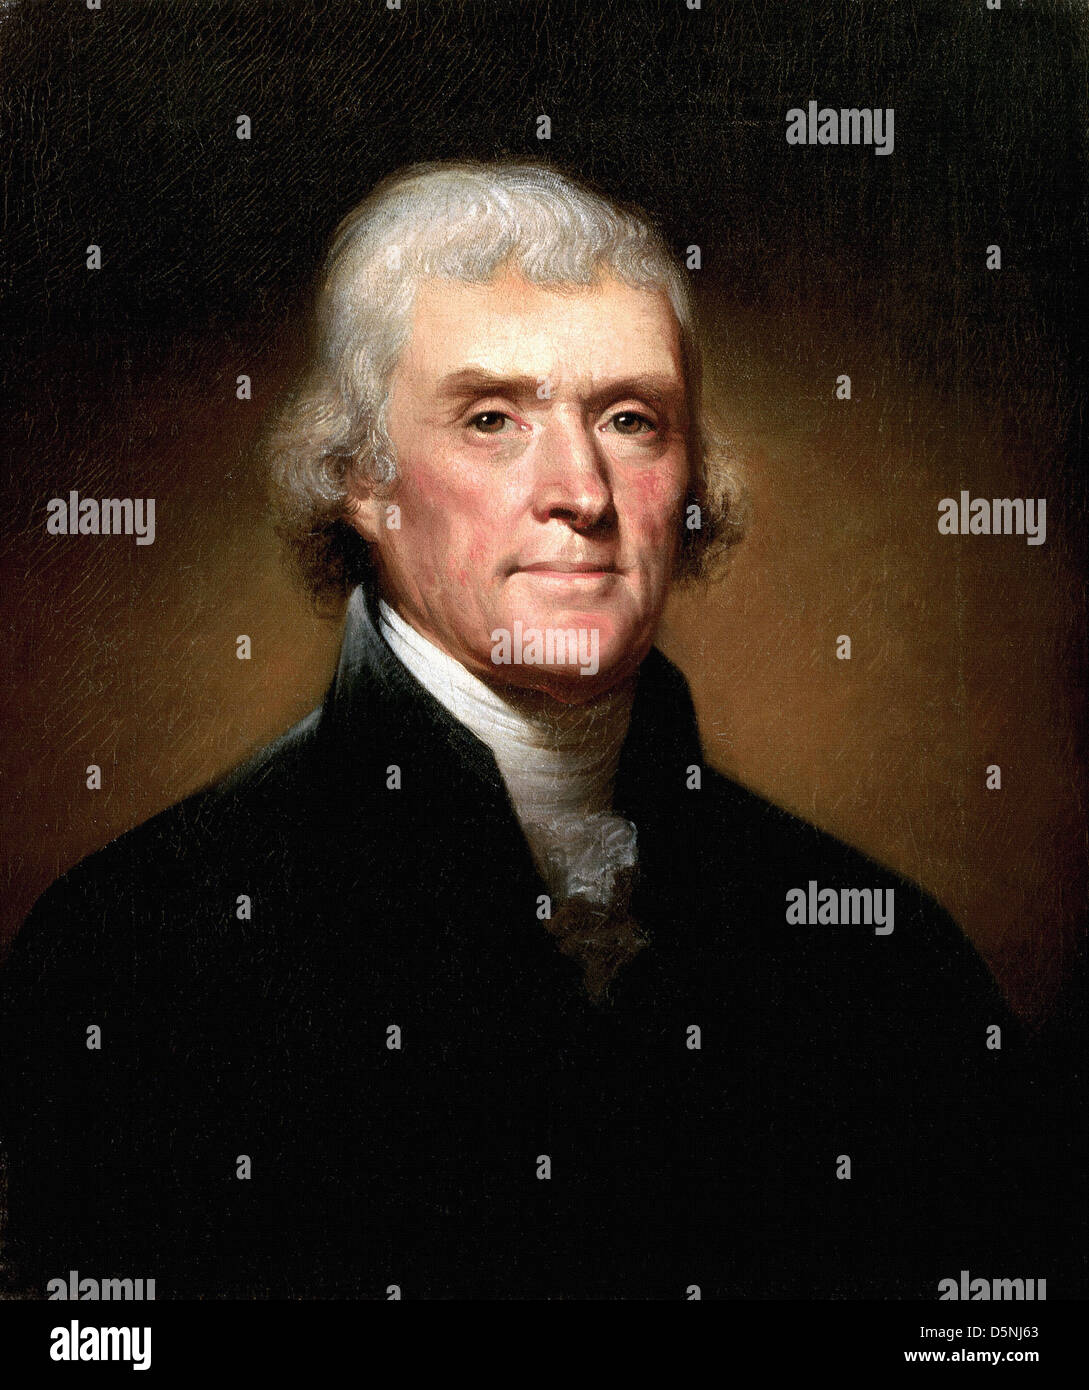 Thomas Jefferson, 3rd President of the United States. by Rembrandt Peale, 1800 Oil on canvas. White House Historical Association Stock Photo